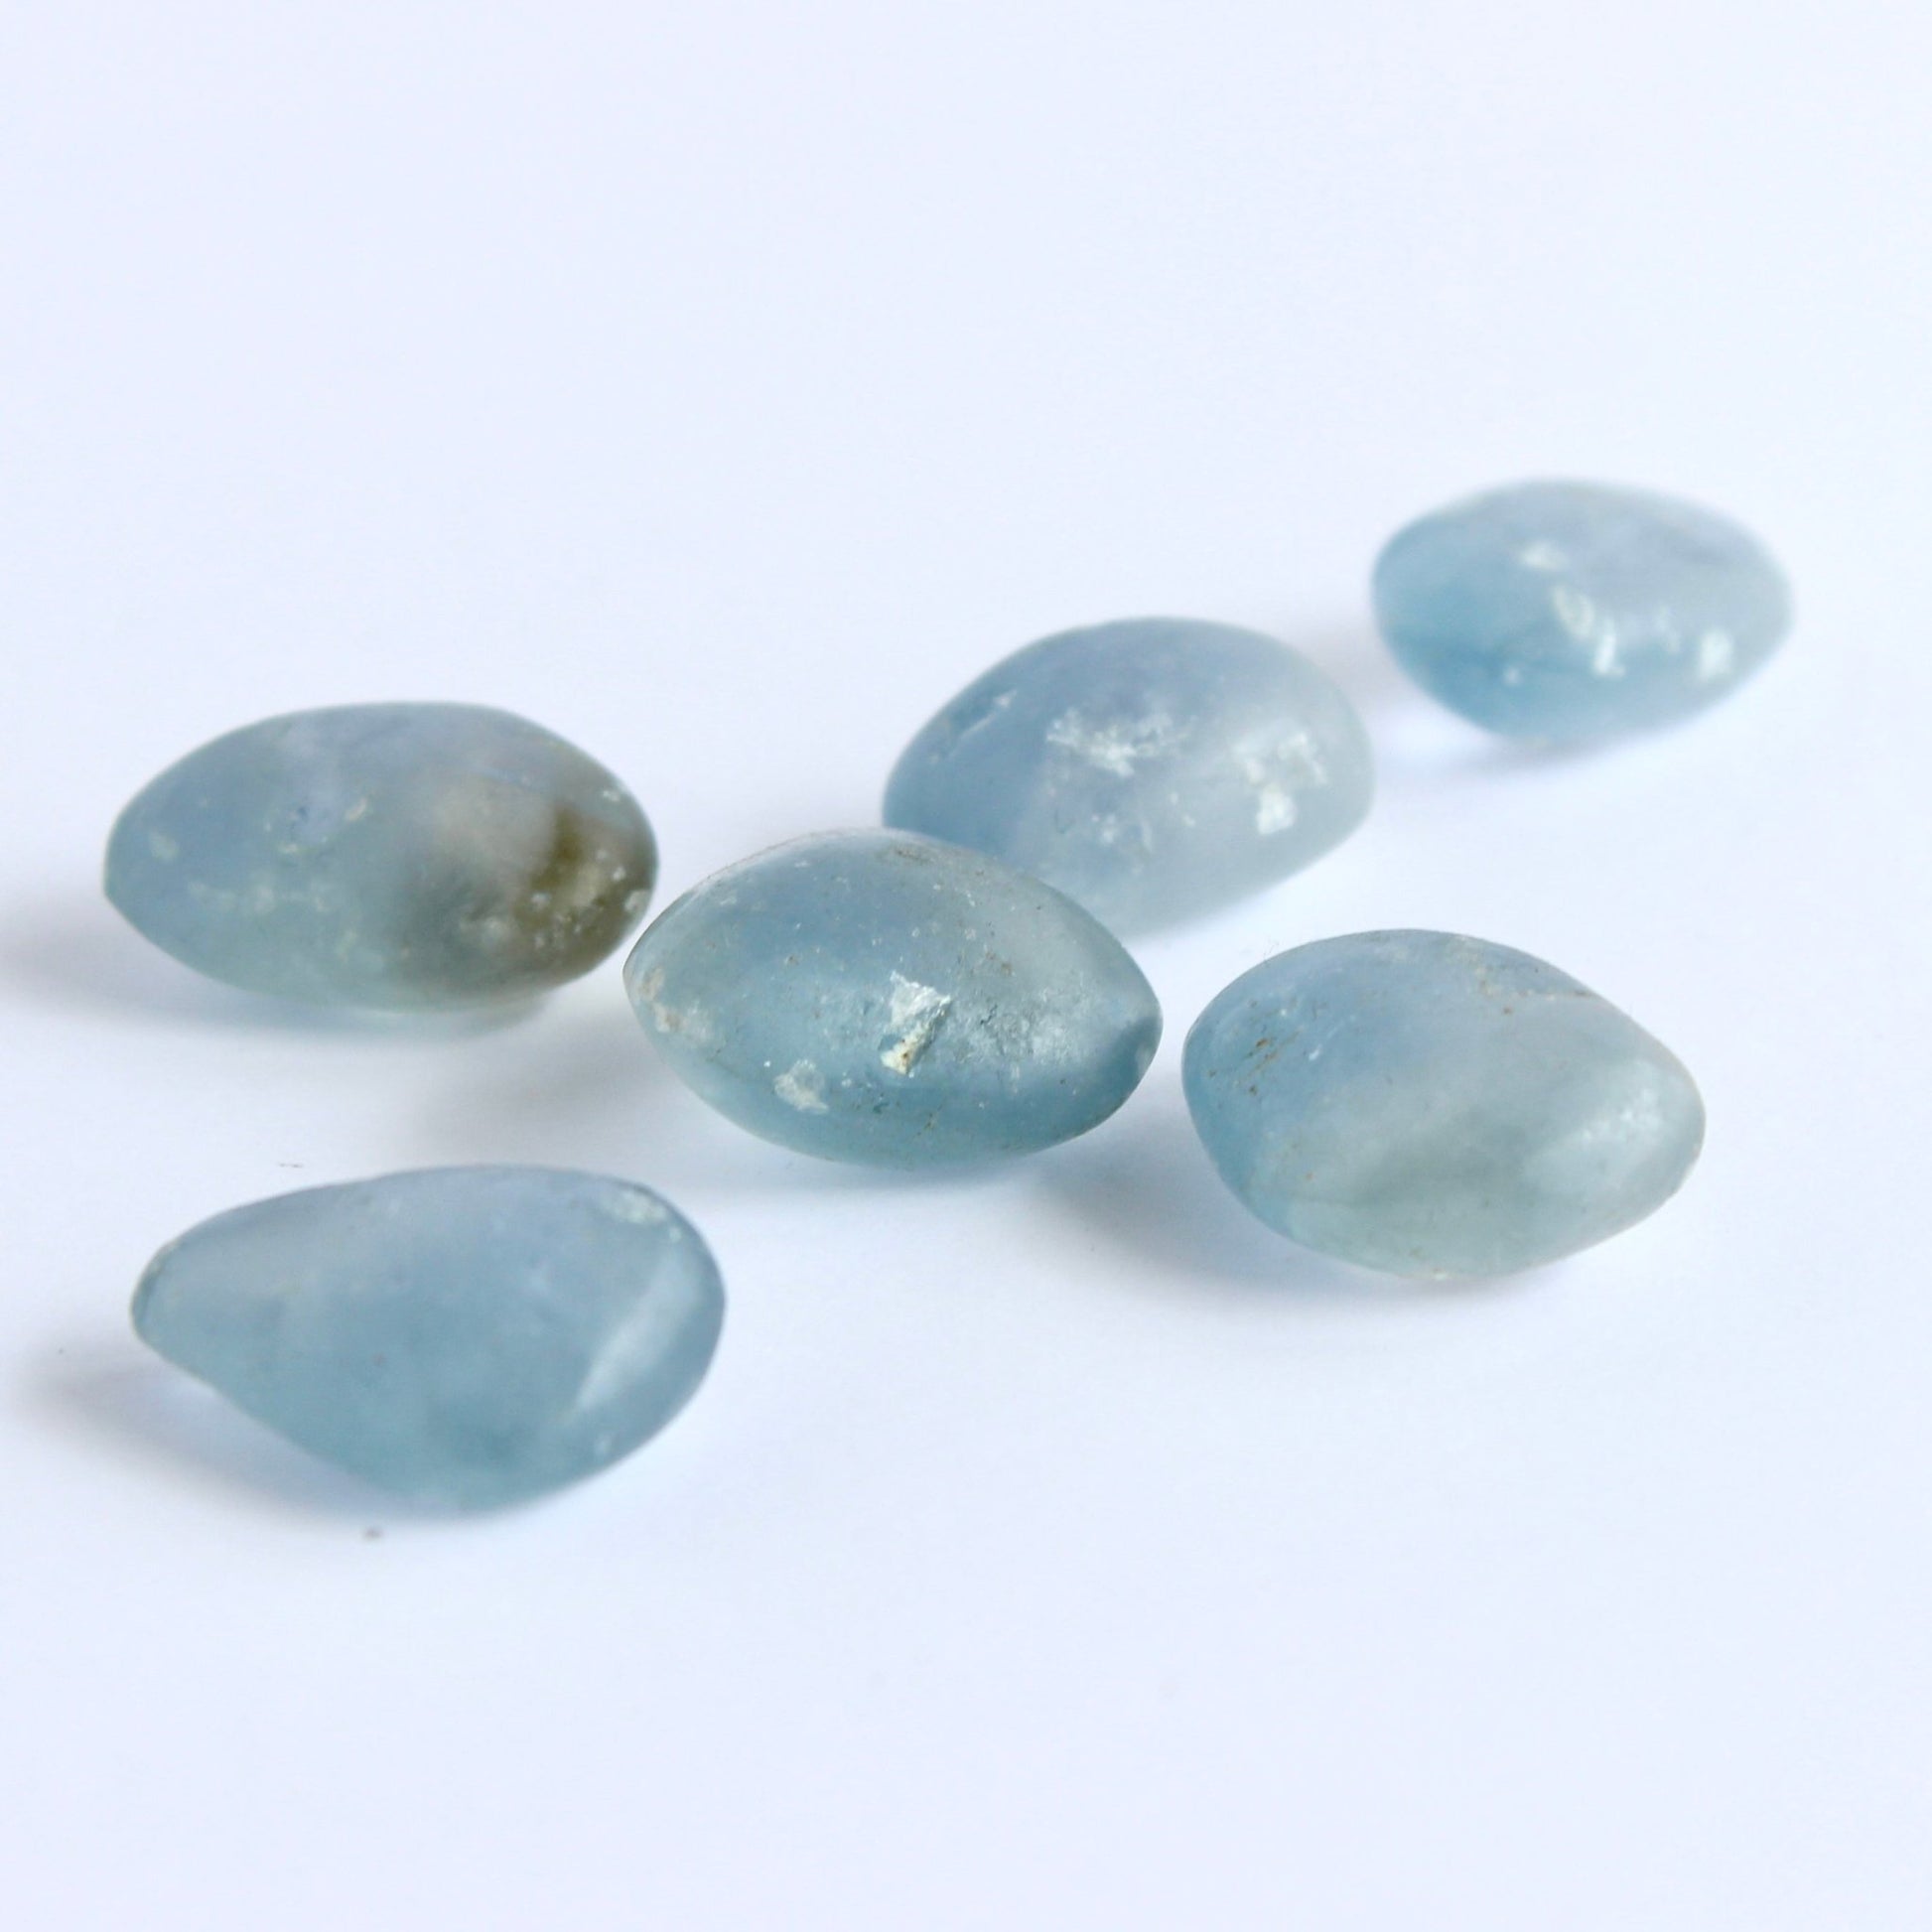 Celestite Tumble - Conscious Crystals New Zealand Crystal and Spiritual Shop